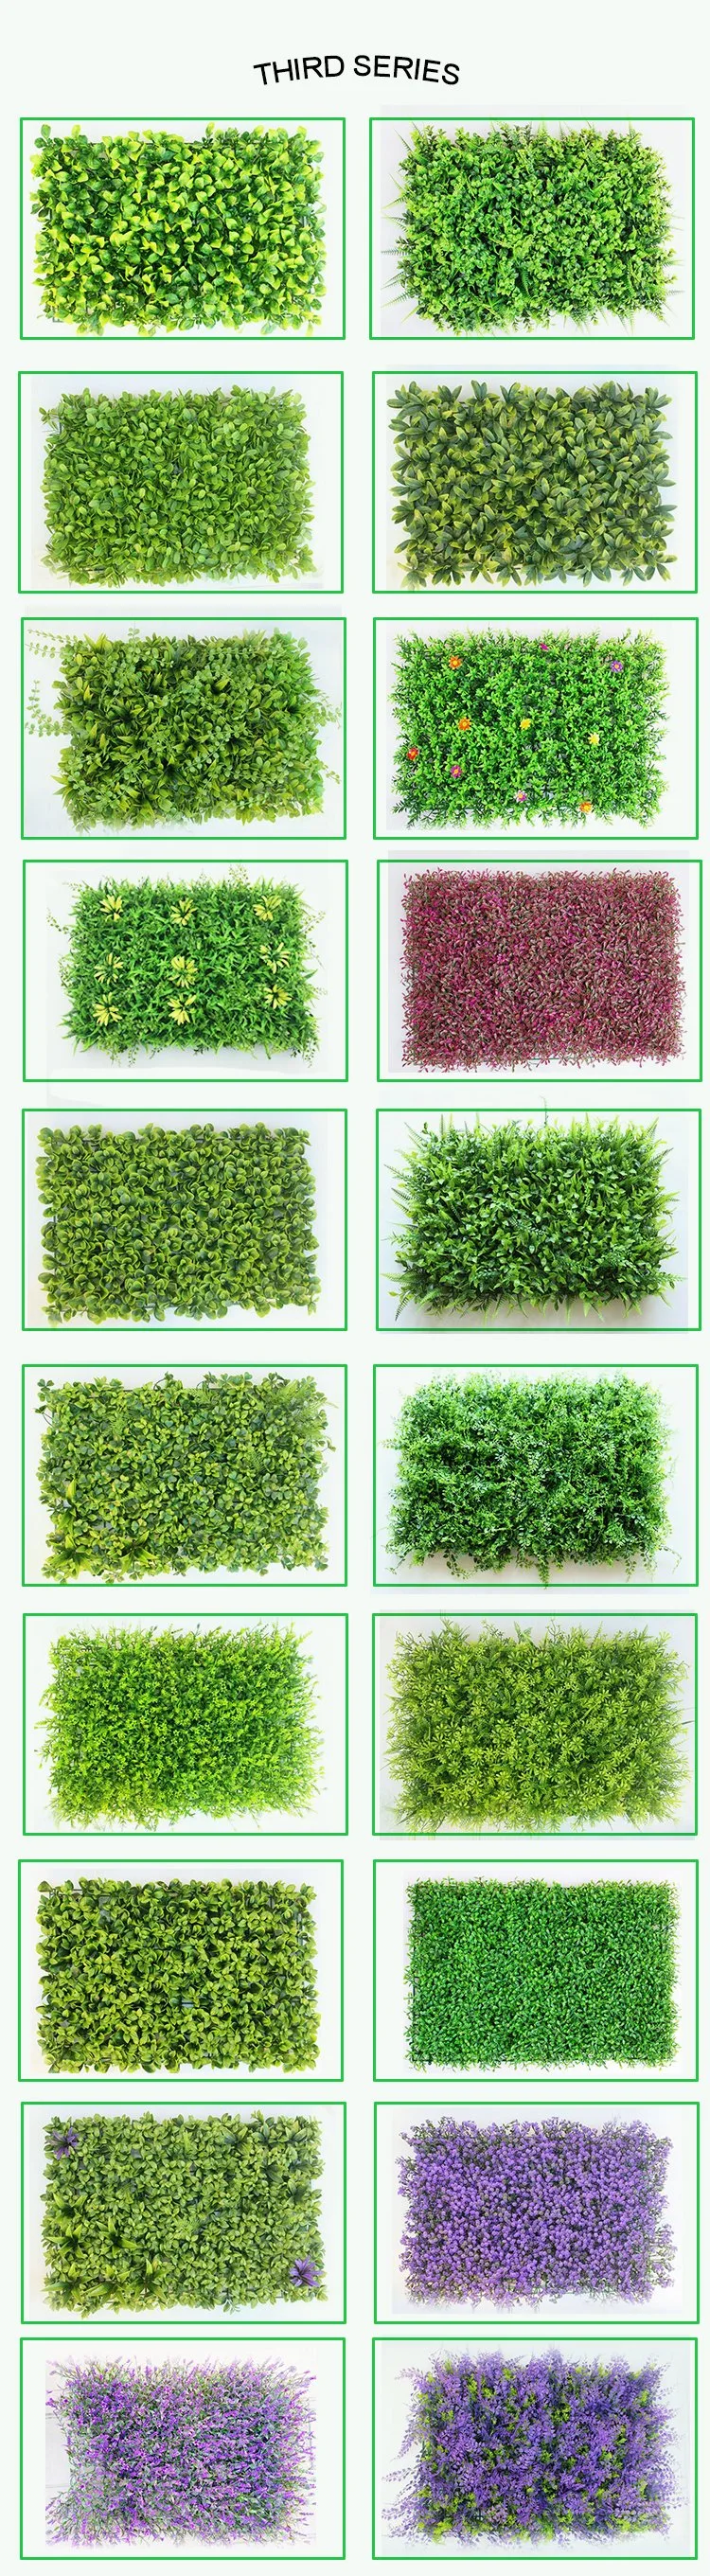 Handmade Lasting Artificial Leaf Fence Grass Boxwood Panels for Garden Outdoor Decoration